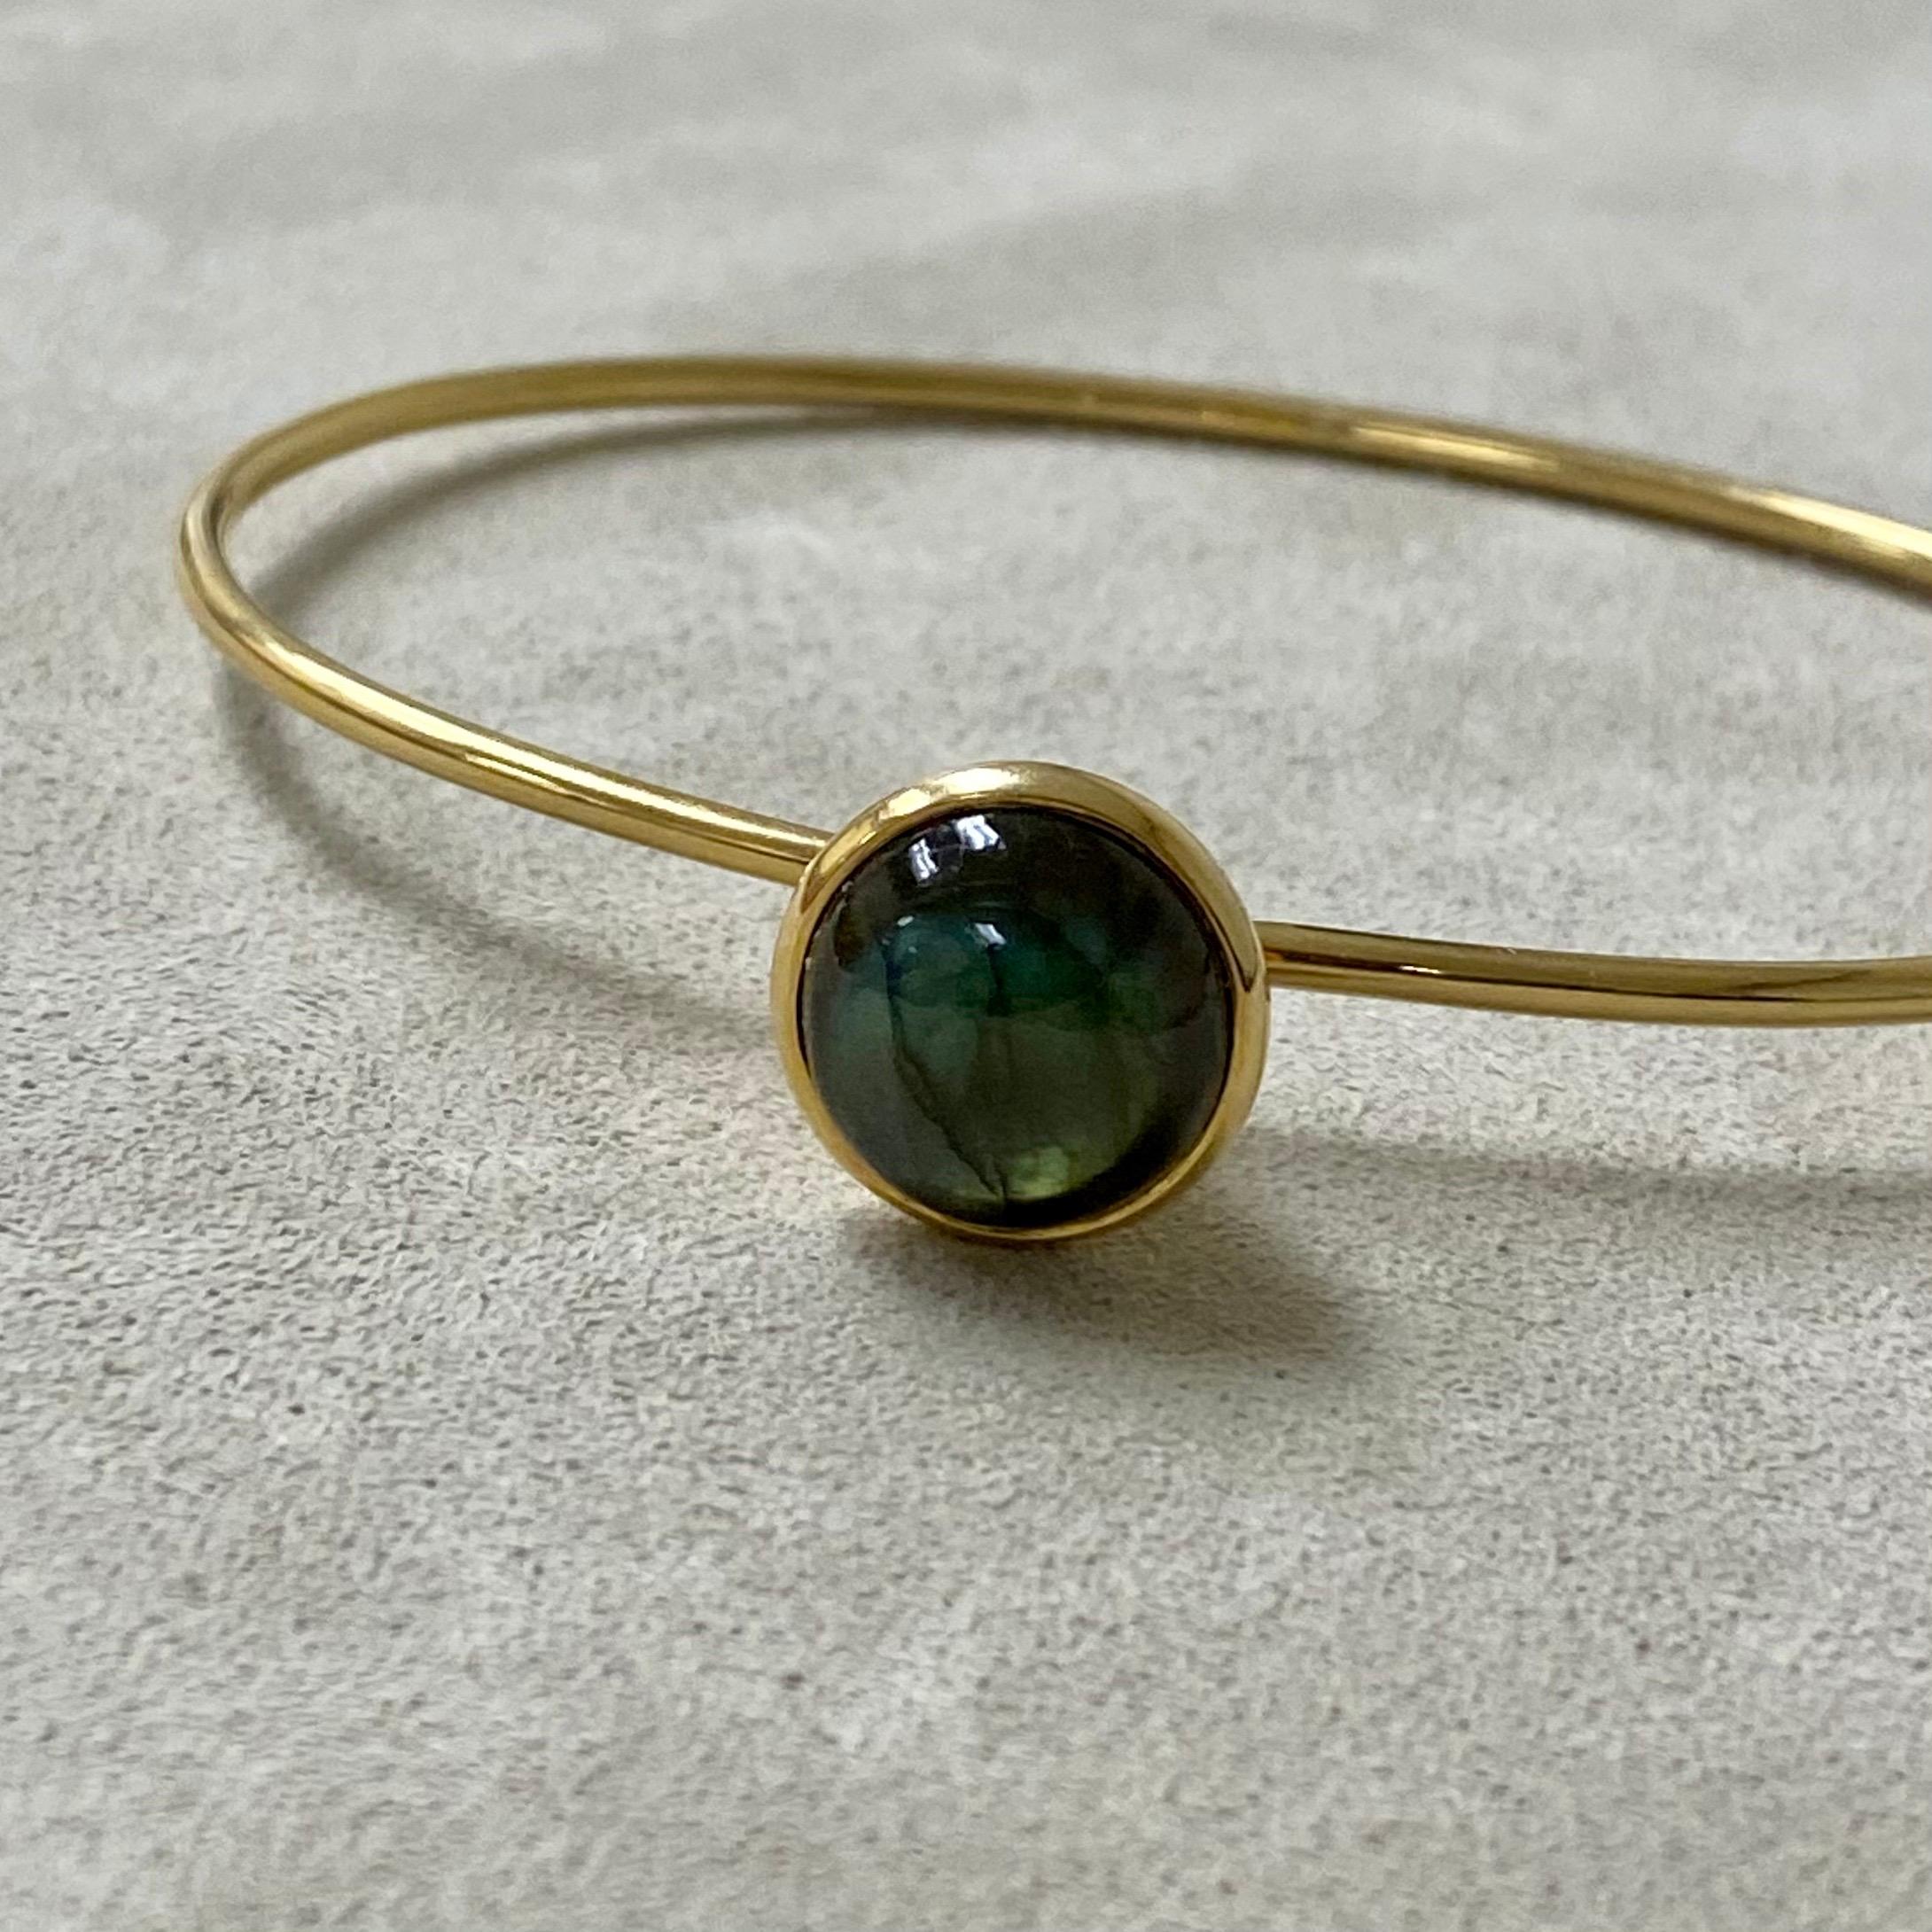 Created in 18 karat yellow gold
Labradorite 7.5 carats approx.
Openable oval bracelet
Hidden mechanism to open under bauble

Exquisitely crafted in 18 karat yellow gold, this captivating bracelet features a luminous labradorite stone weighing in at